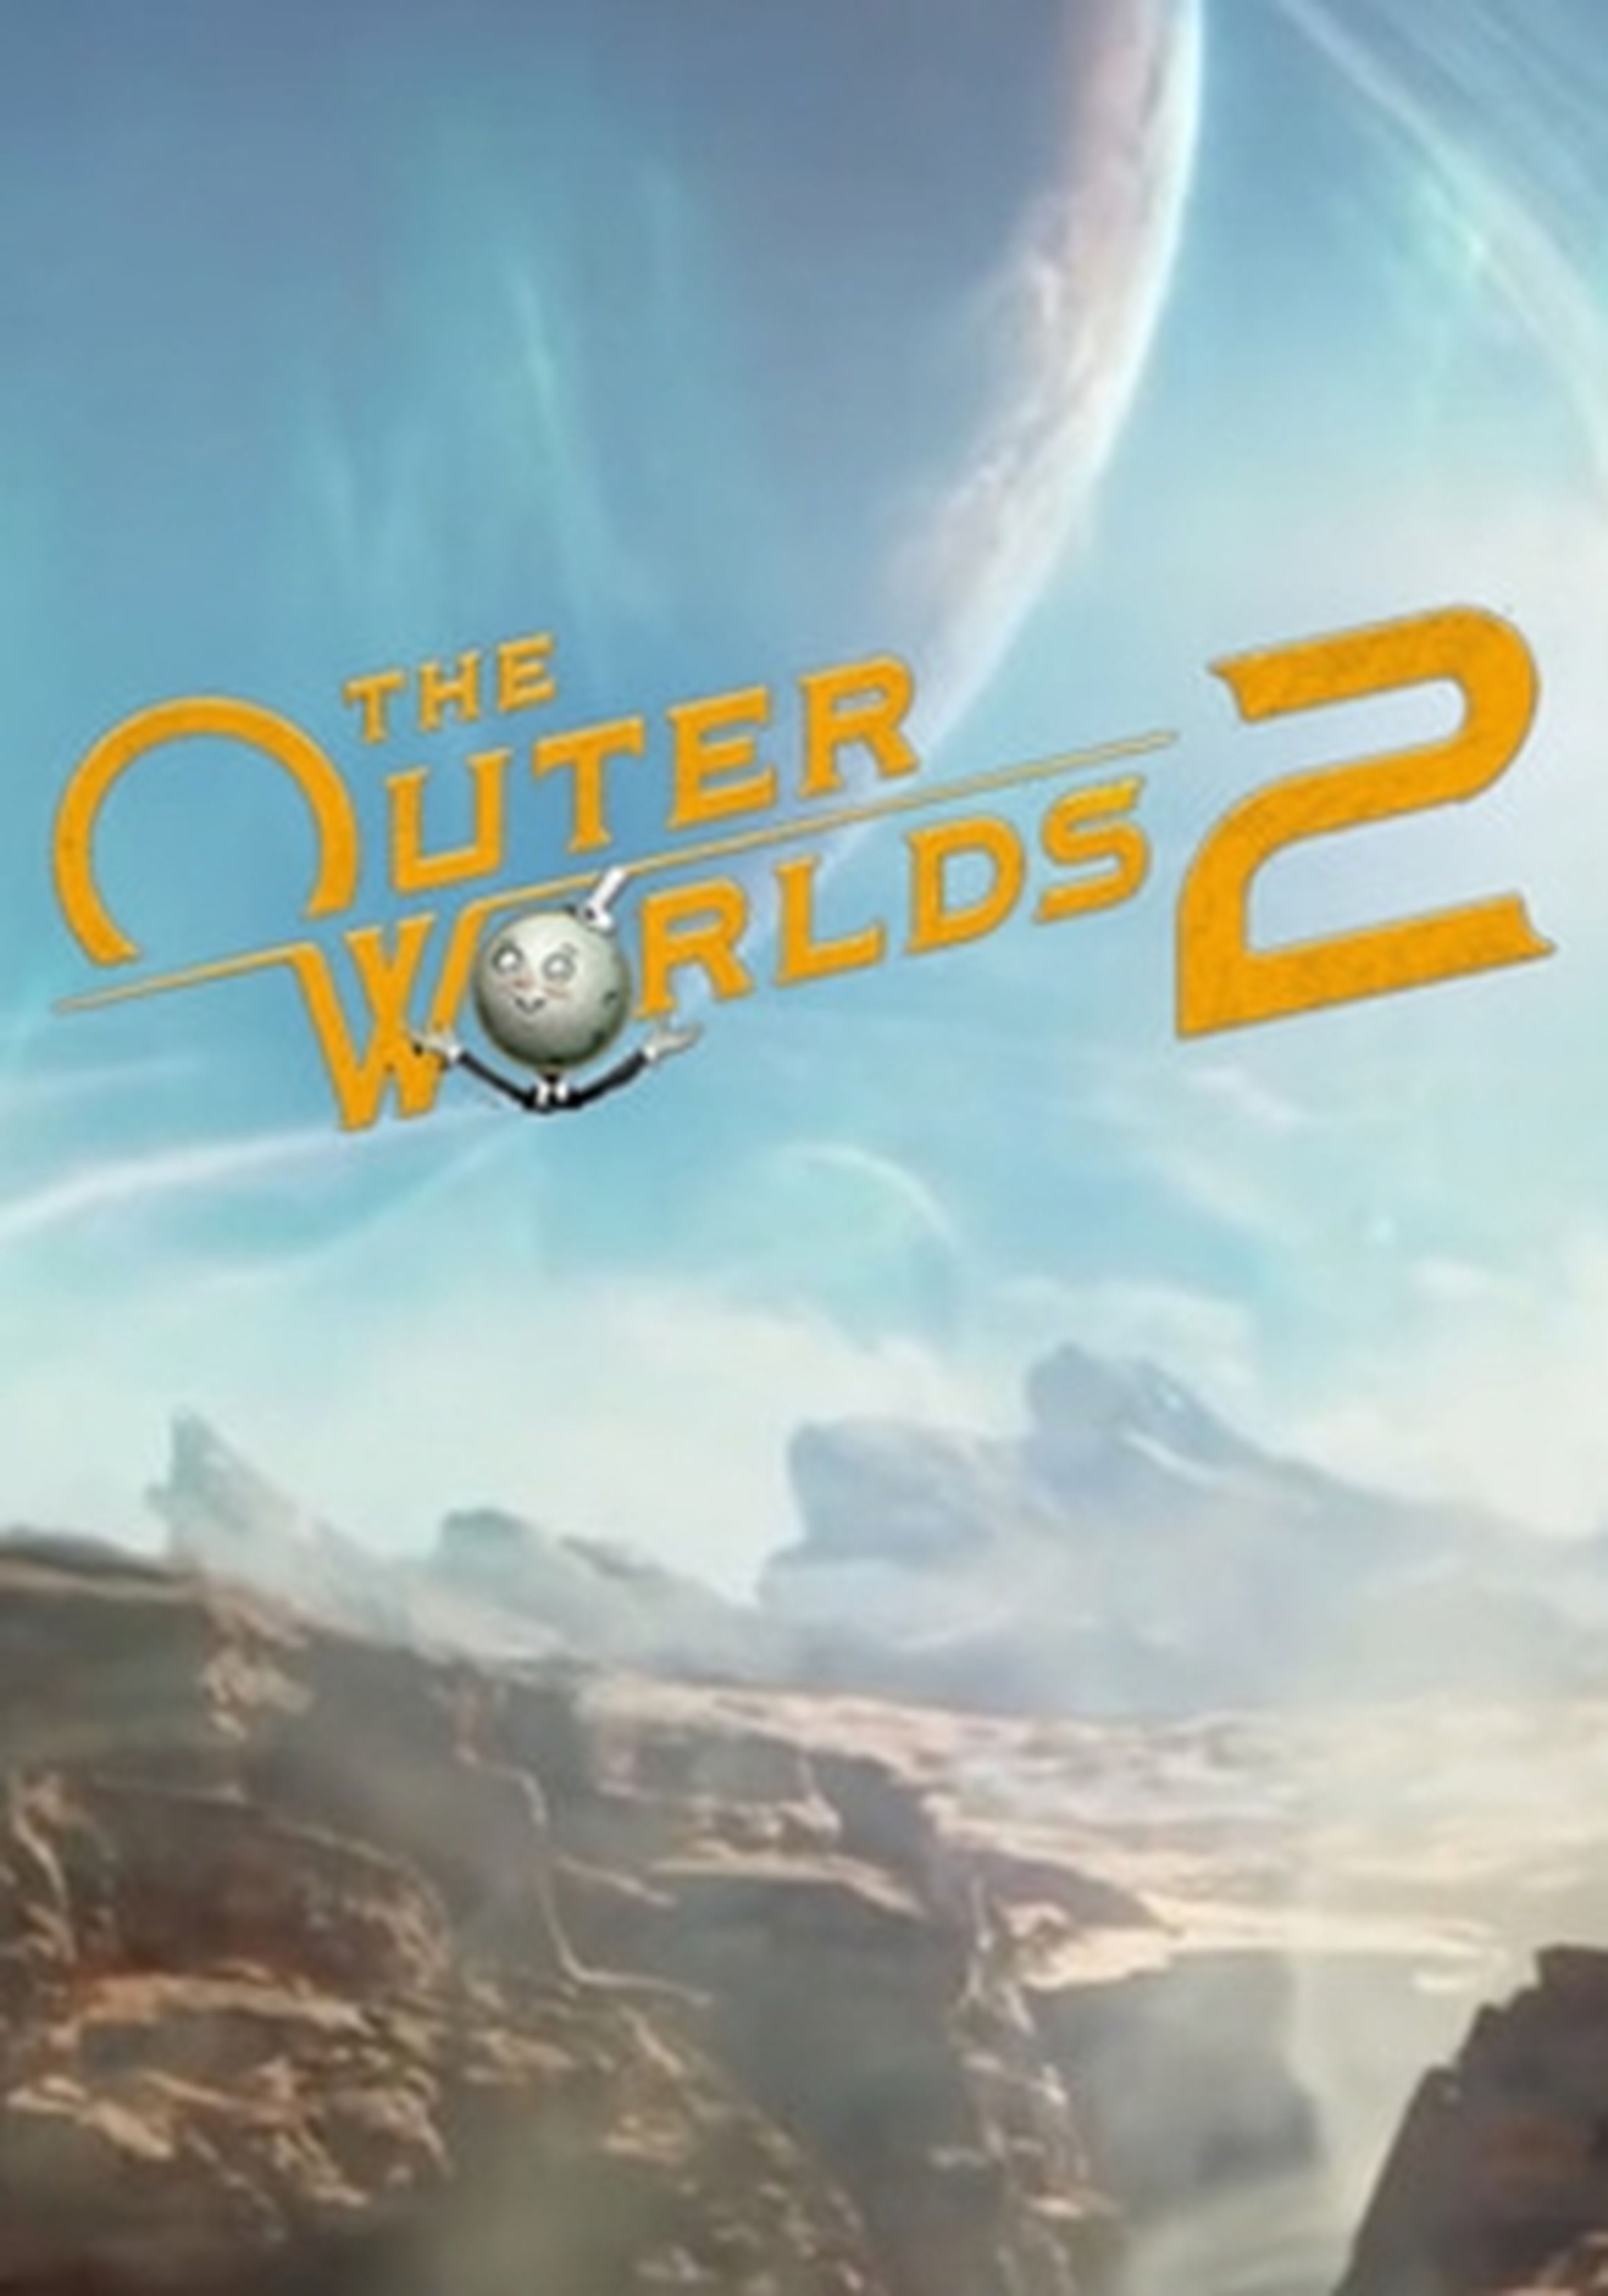 The Outer Worlds 2 cartel